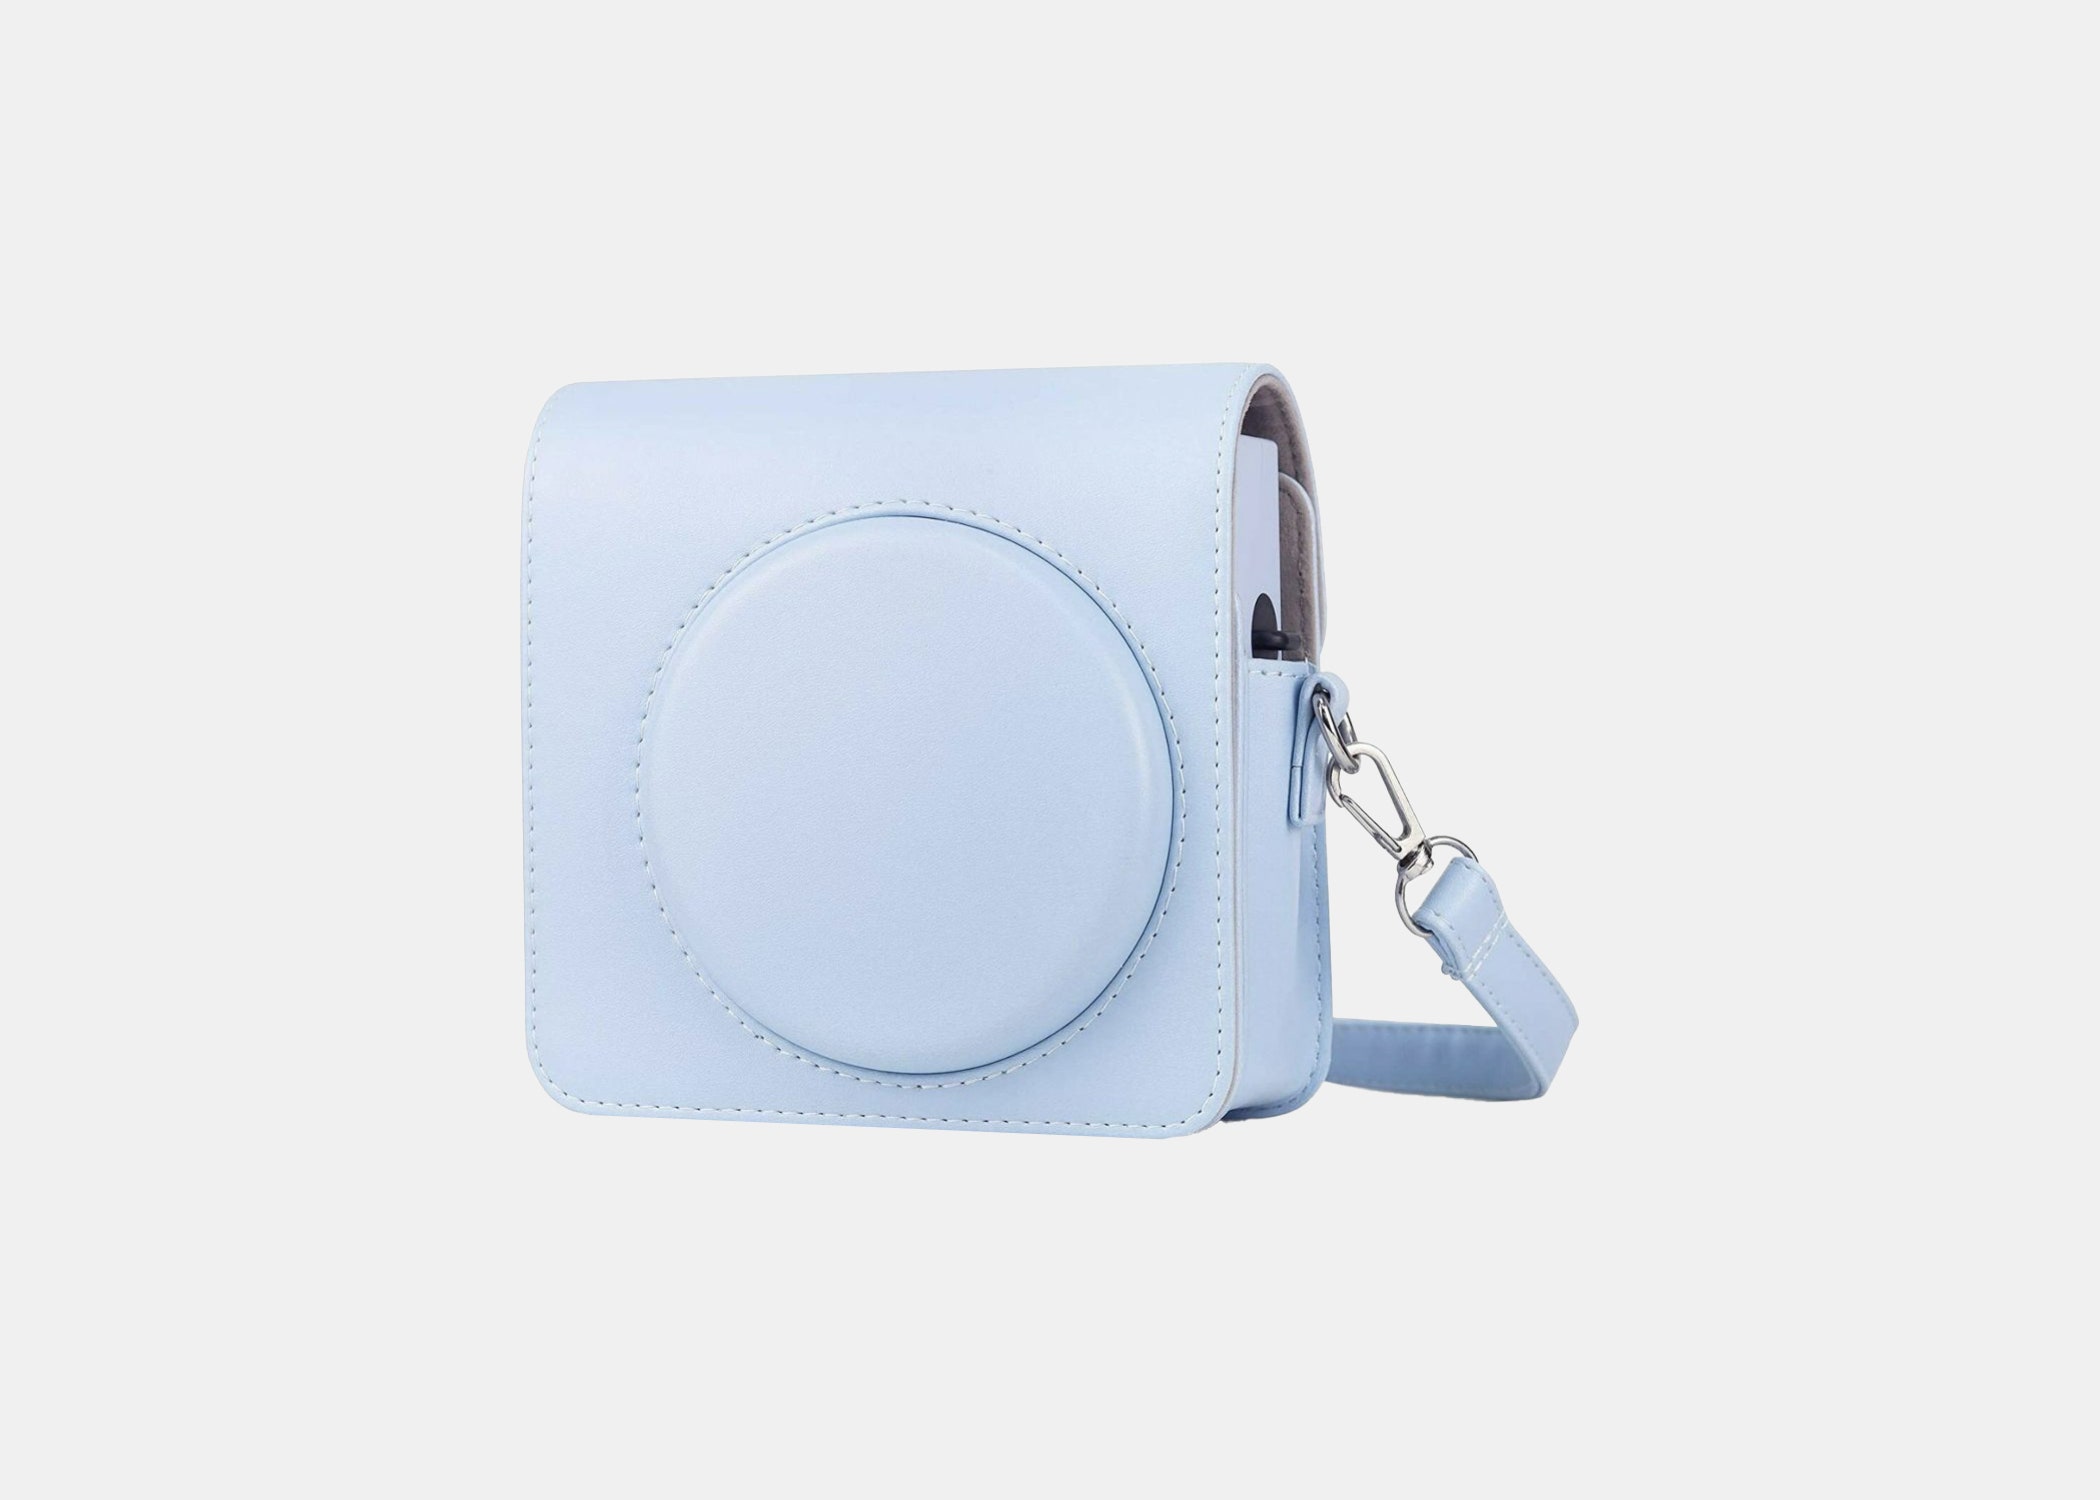 <p><strong>Best for Instax owners</strong></p> <p>Fans of Fujifilm’s beloved instant cameras will adore this accessory that makes bringing an Instax along for a trip so effortless and cute. The icy blue synthetic leather and artful stitching make this piece a stand-out. There’s even a detachable cover to take pictures without removing the camera from the case.</p> <p><strong>Noteworthy features:</strong> Detachable cover, adjustable strap</p> $40, Target. <a href="https://www.target.com/p/focus-camera-square-camera-case-glacier-blue-for-instax-square-sq1-instant-camera/-/A-85069190#lnk">Get it now!</a><p>Sign up to receive the latest news, expert tips, and inspiration on all things travel</p><a href="https://www.cntraveler.com/newsletter/the-daily?sourceCode=msnsend">Inspire Me</a>